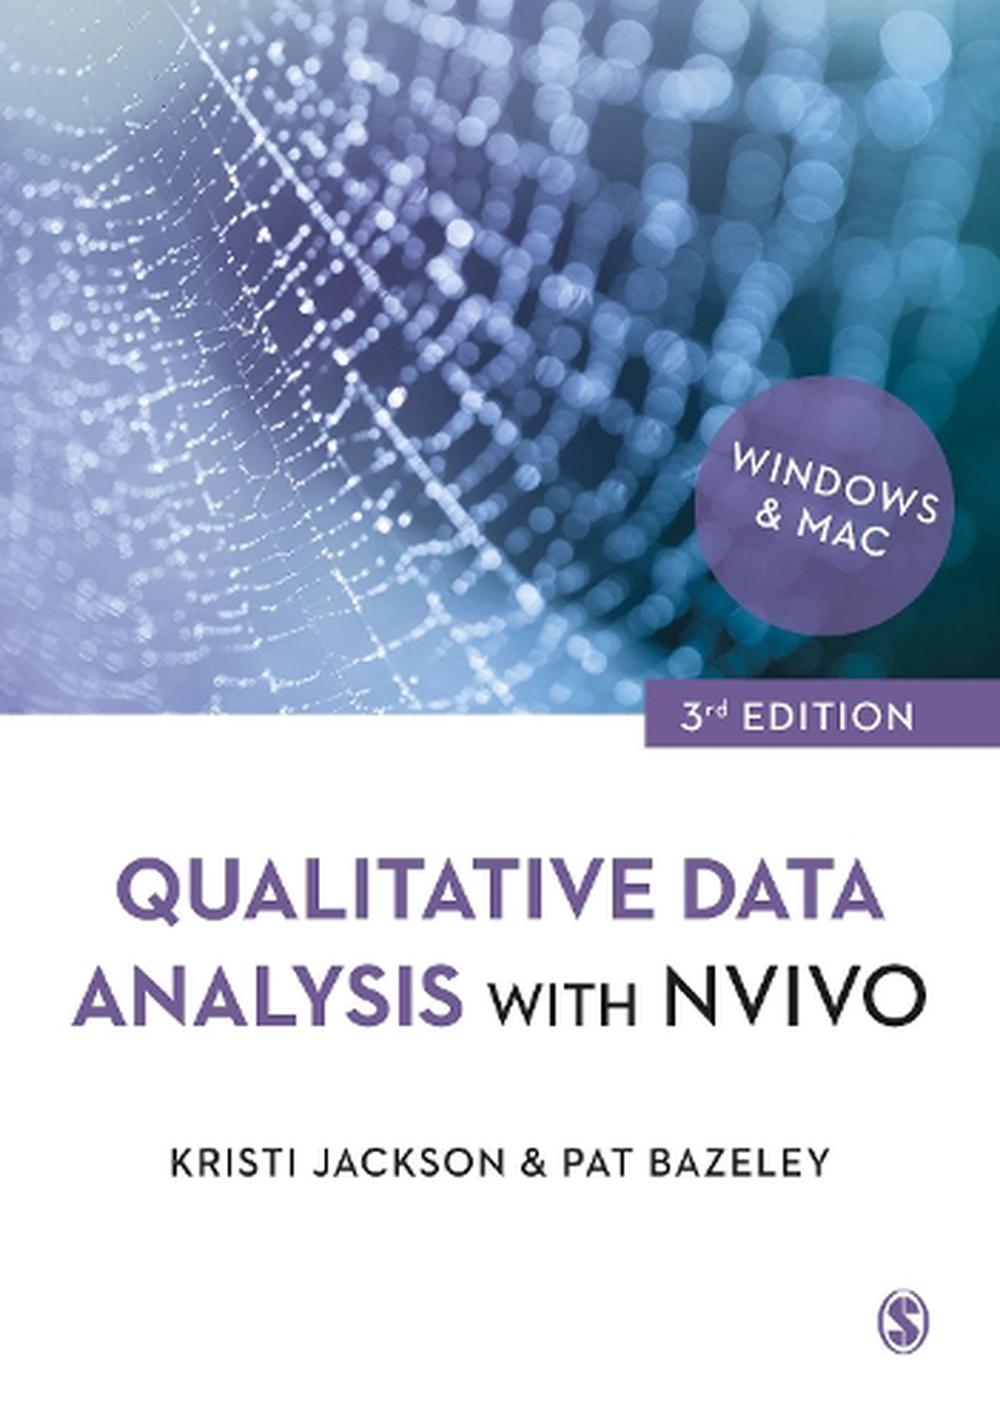 nvivo for content analysis